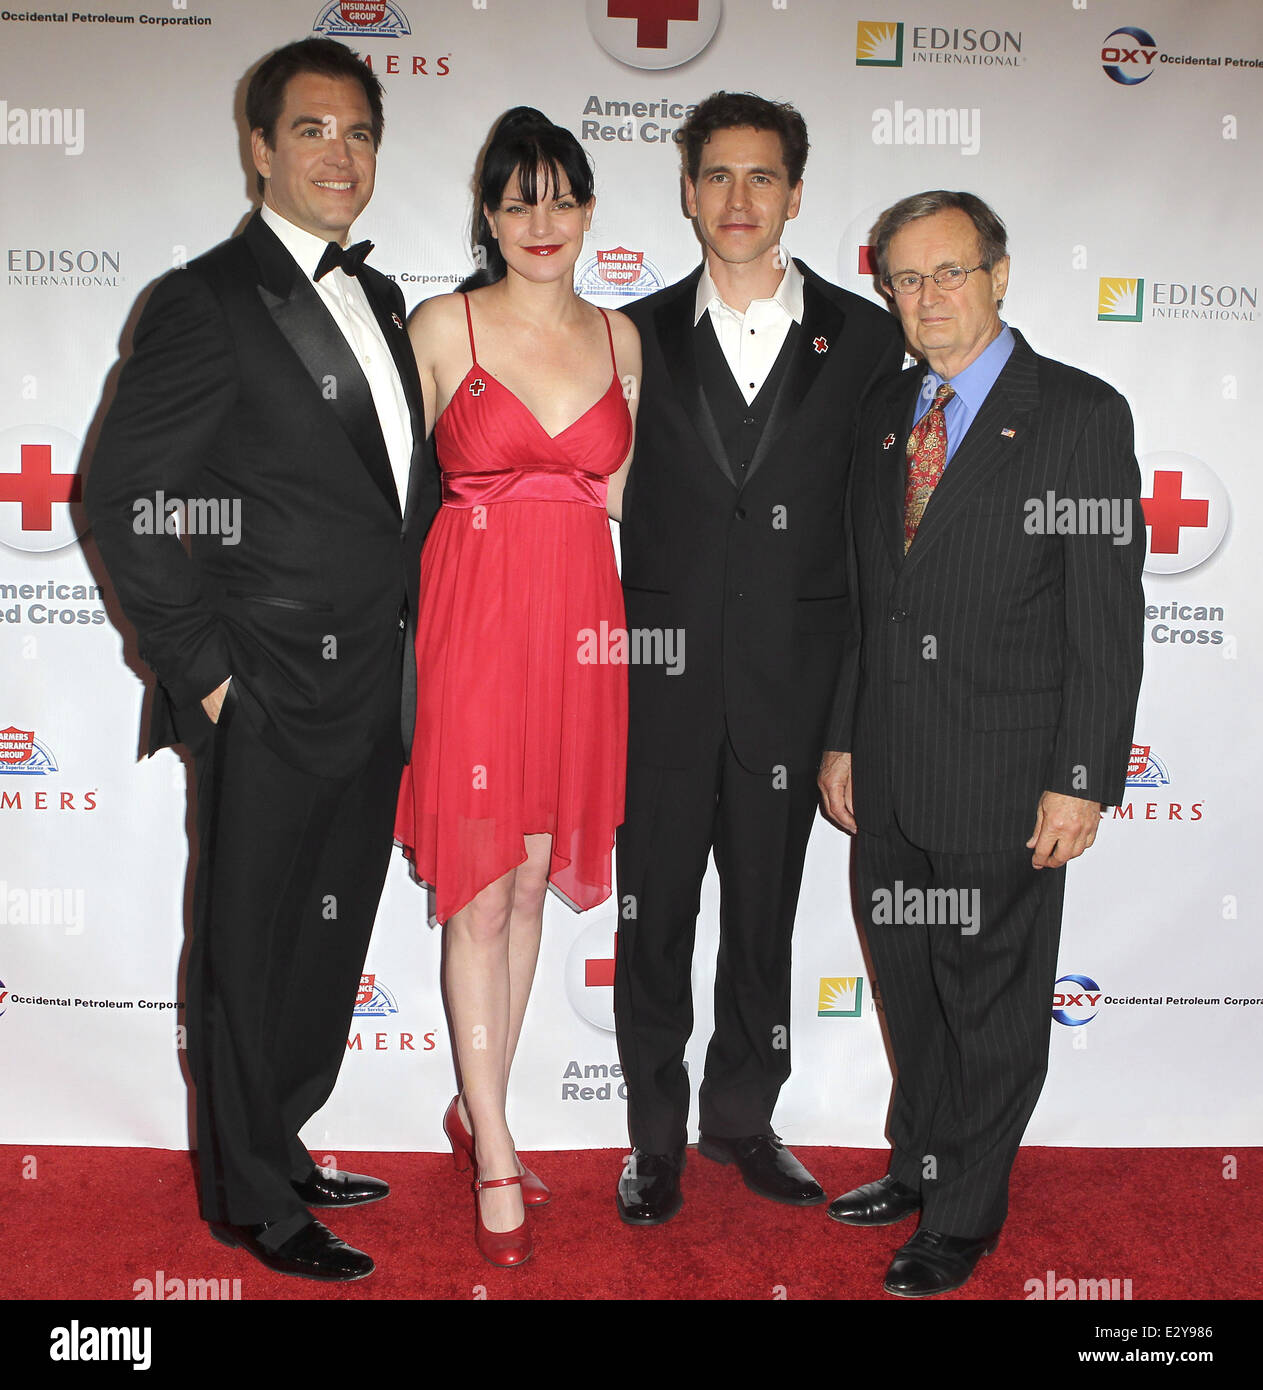 Members of the Armed Forces and the cast of 'NCIS' honoured at the 'Annual Red Cross Red Tie Affair' - Arrivals  Featuring: Michael Weatherly,Pauley Perrette,Brian Dietzen,David McCallum Where: Santa Monica, California, United States When: 06 Apr 2013 Stock Photo